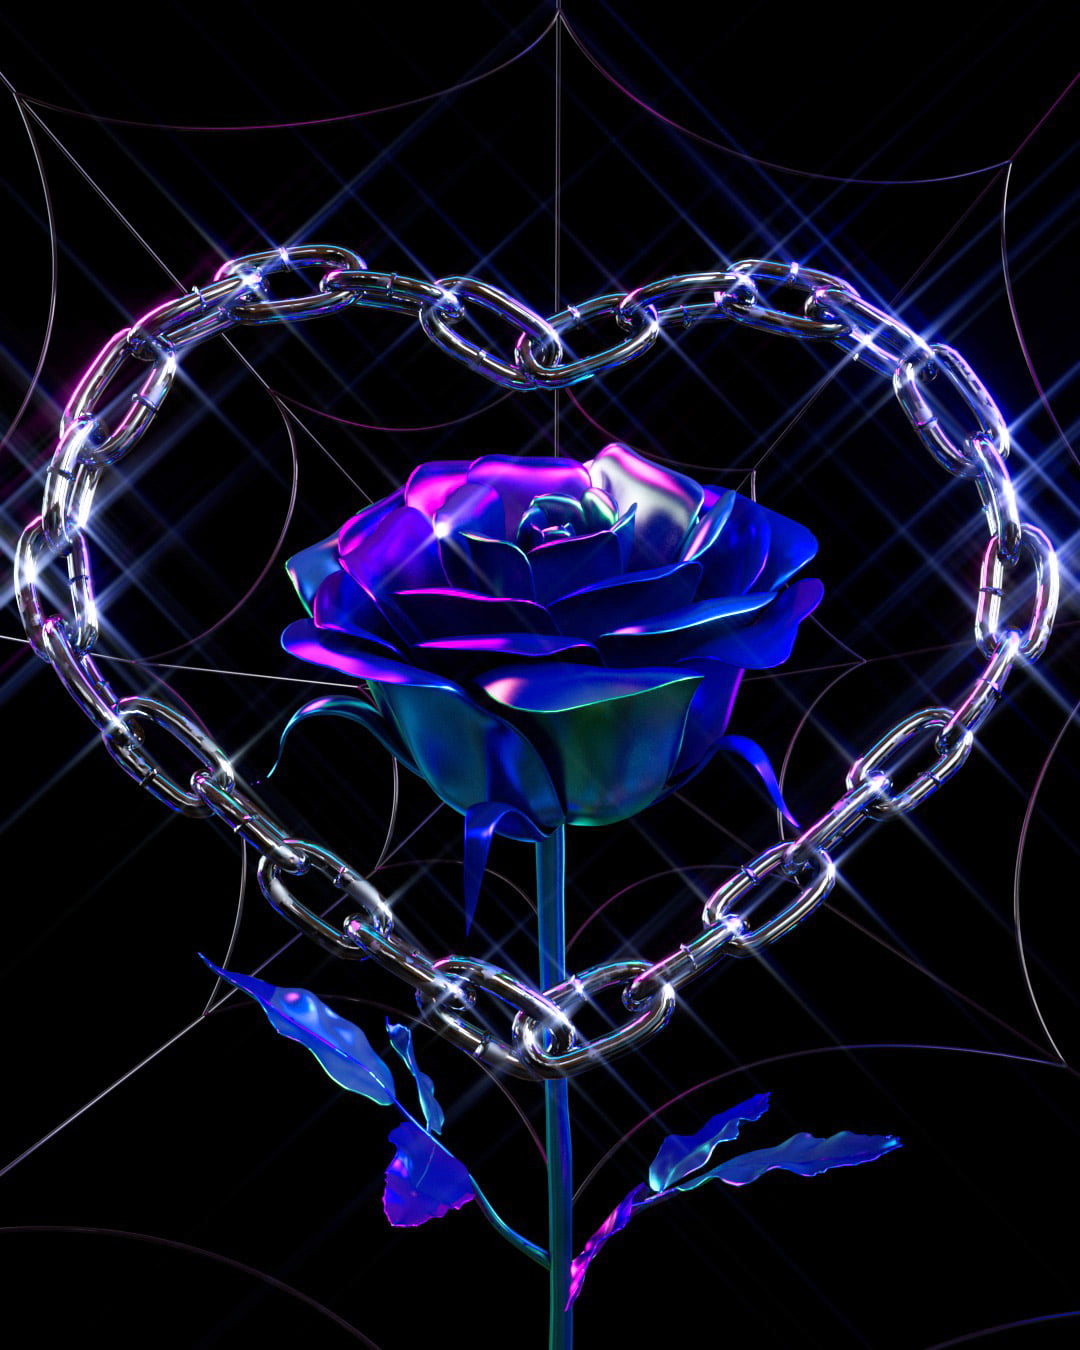 Black background with iridescent spiderweb filling the space. A metallic heart shaped chain in the center framing a blue/magenta rose.